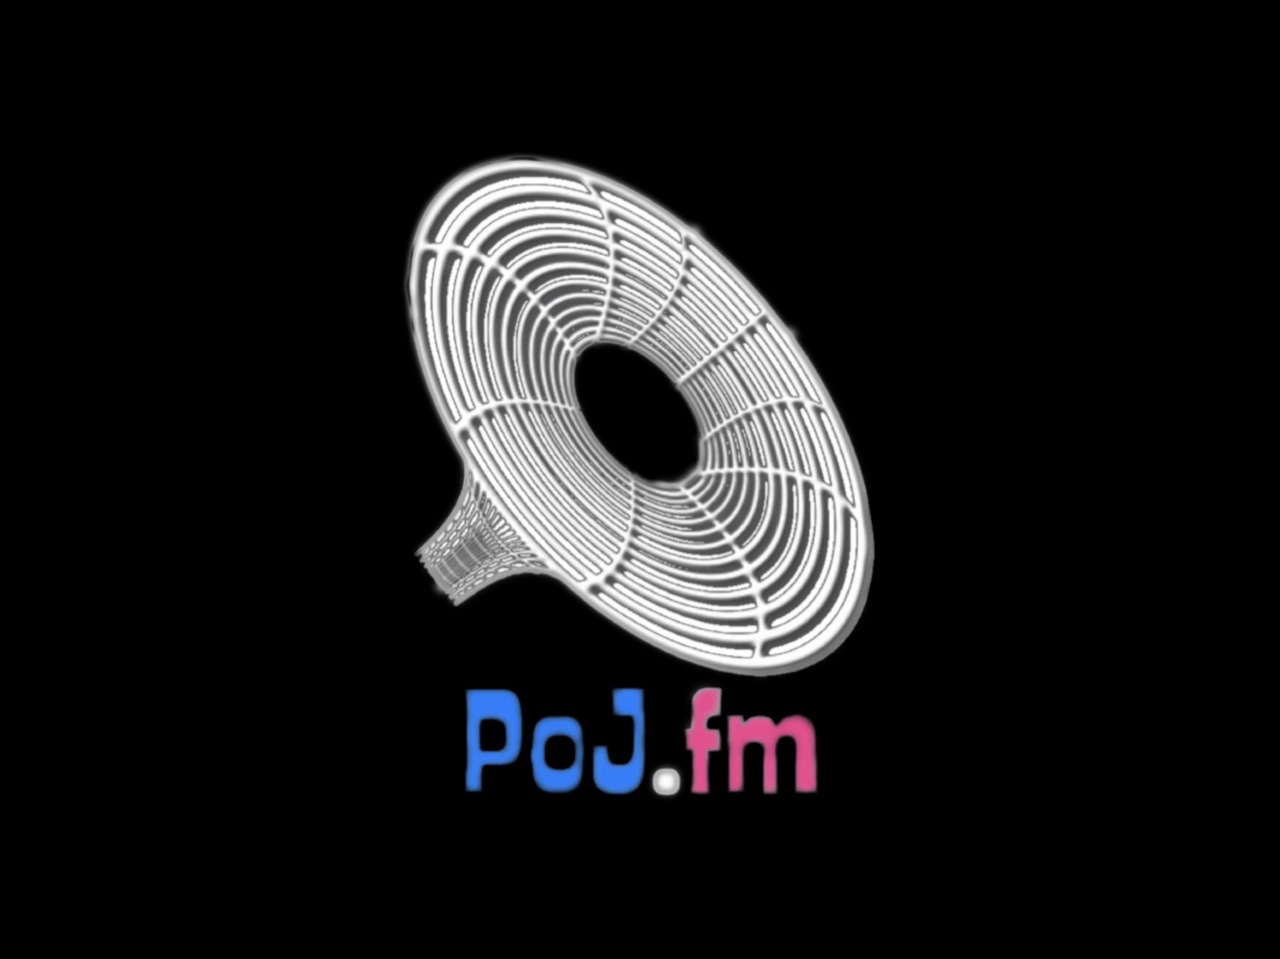 An unframed graphic of the PoJ.fm logo with blue POJ, white dot period, pink fm on a pitch black background.